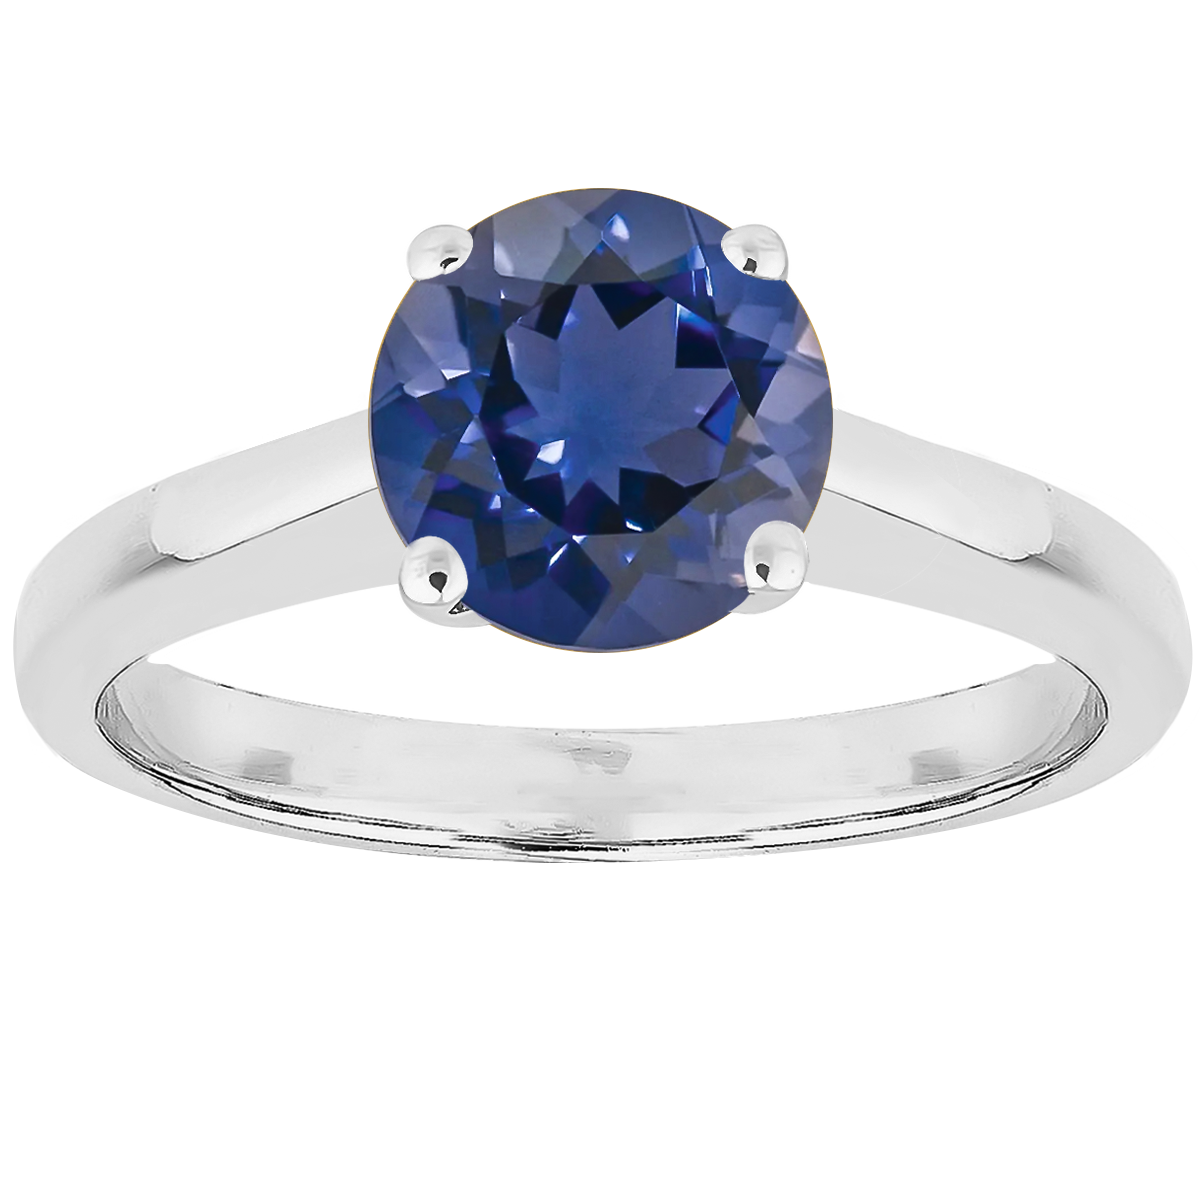 0.85ct Iolite Solitaire Engagement Ring in 9ct White Gold.